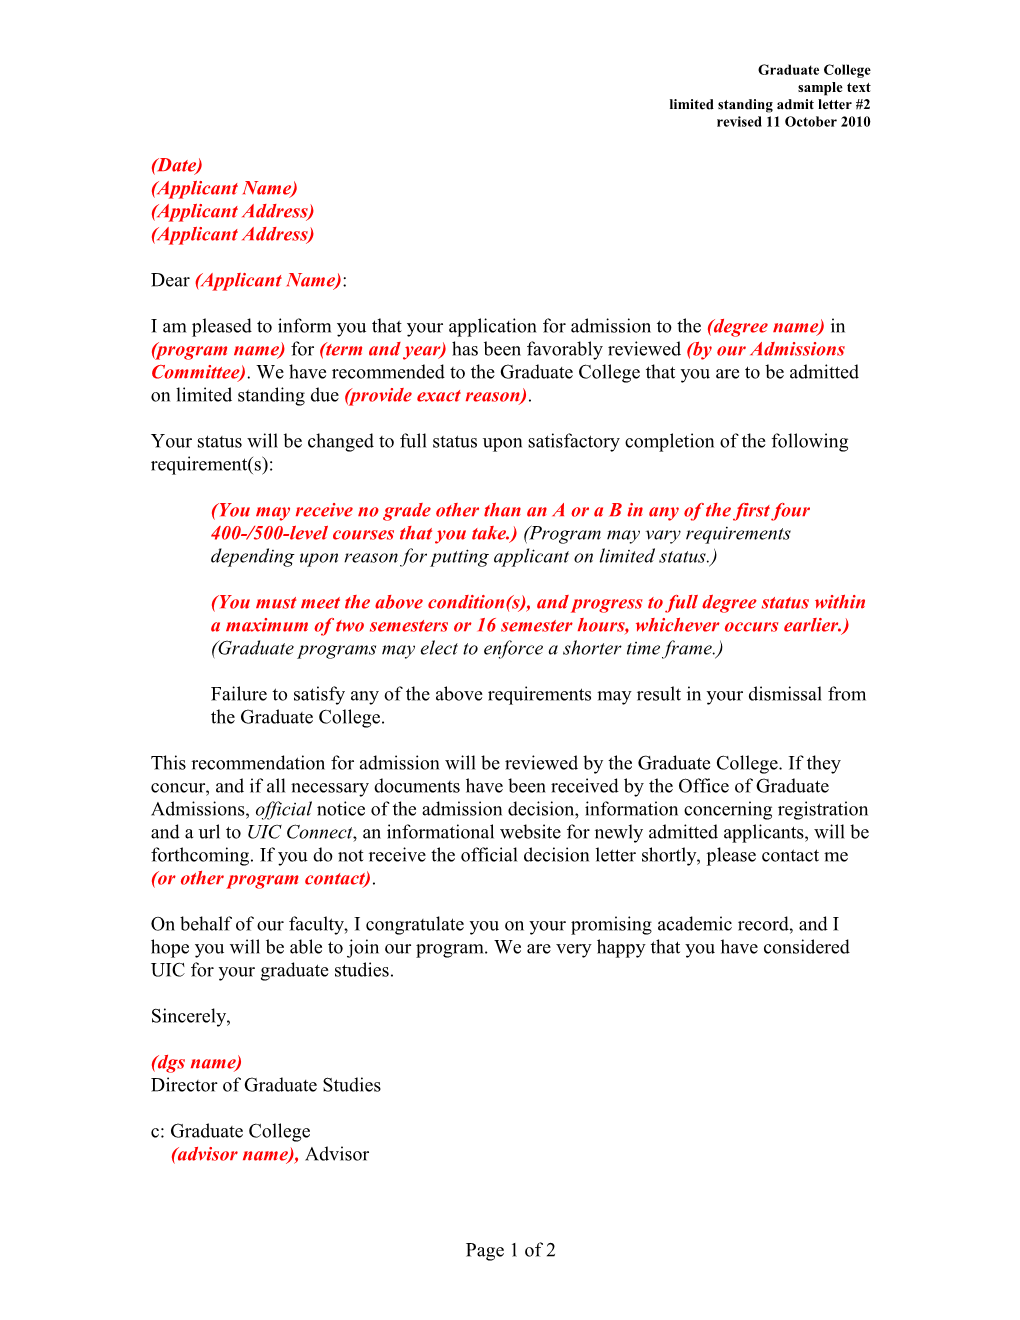 Limited Status Admit Letter #2